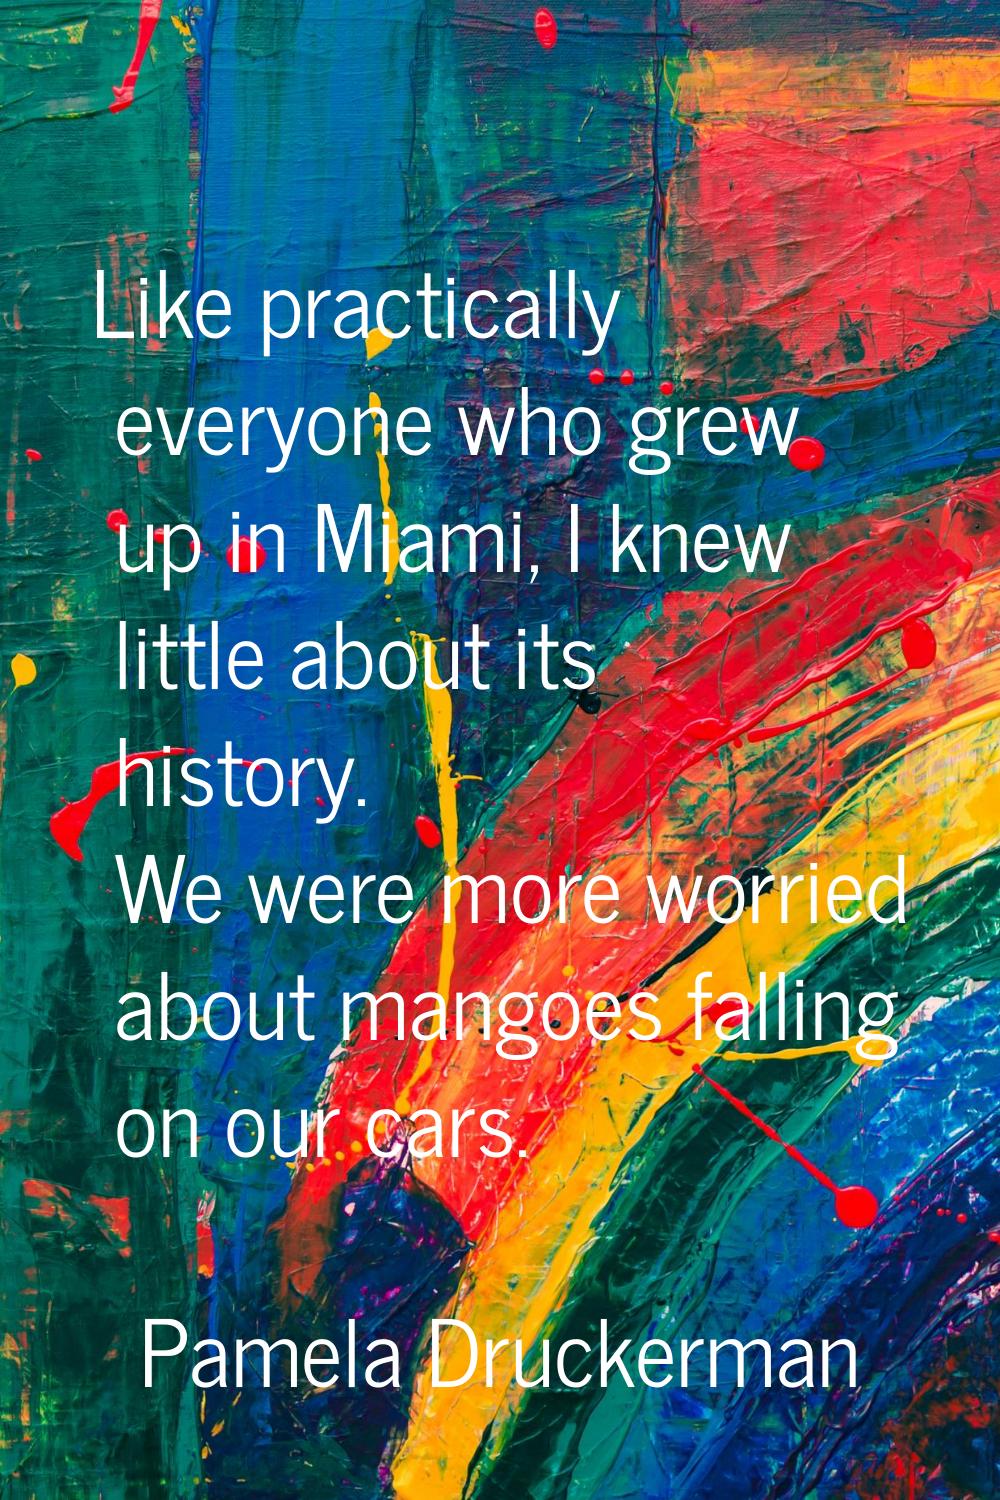 Like practically everyone who grew up in Miami, I knew little about its history. We were more worri